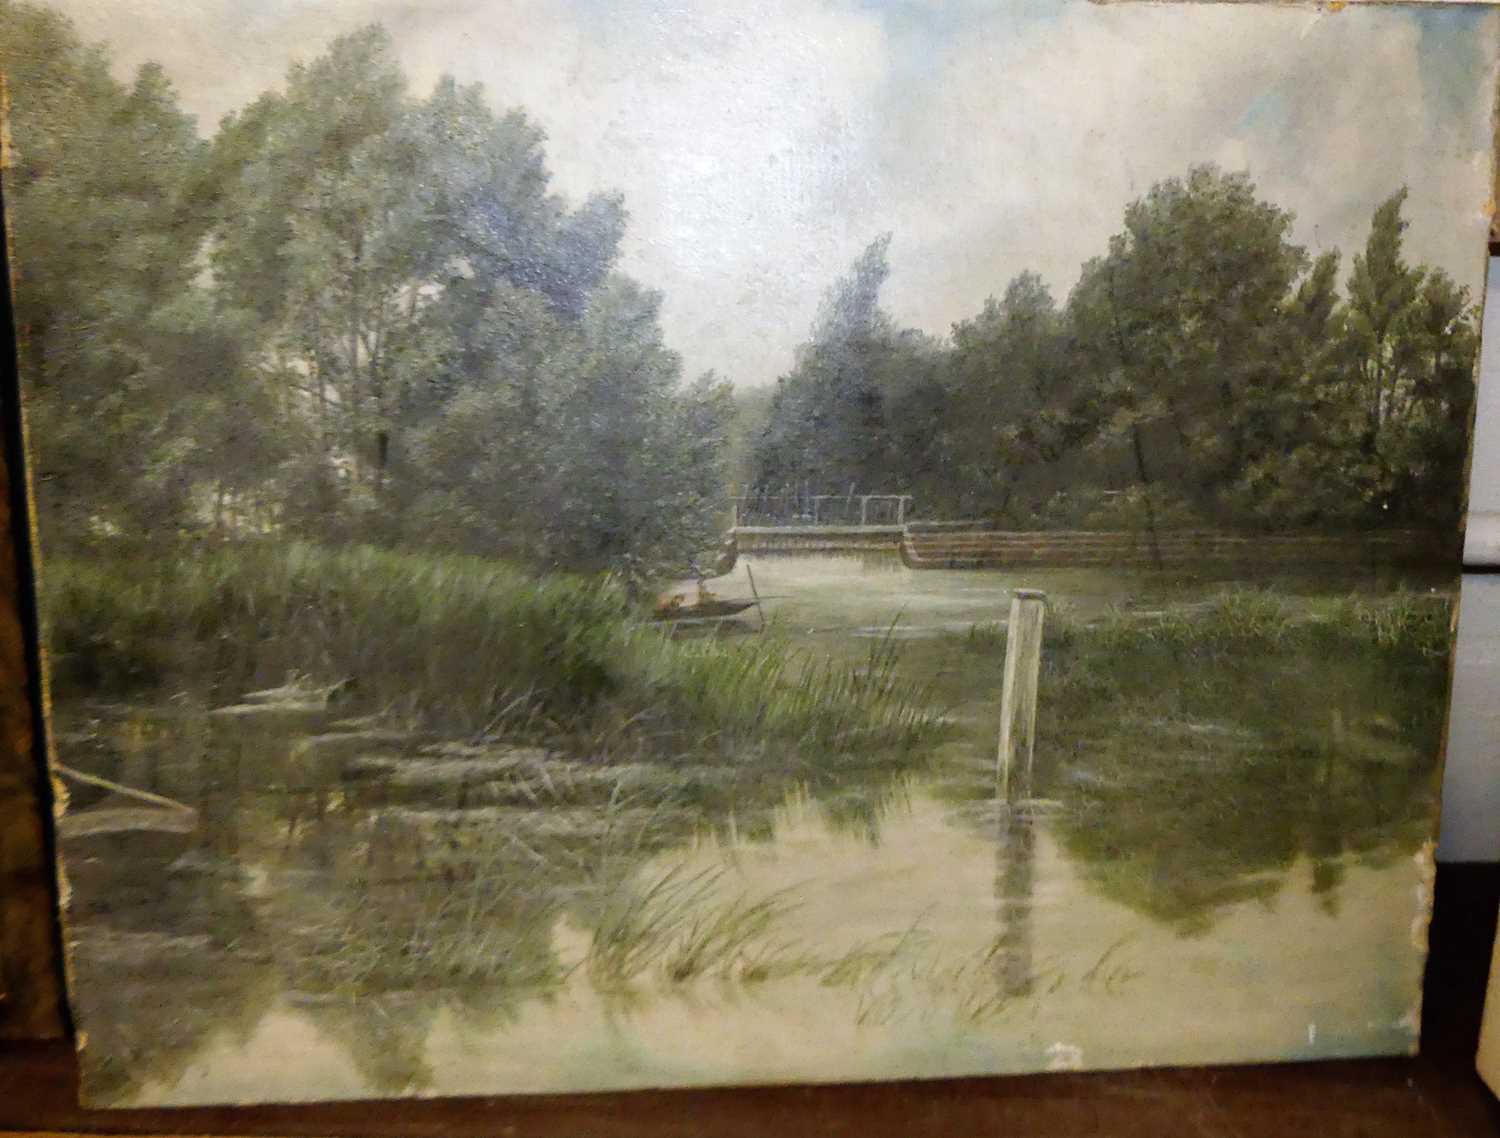 AJ Foot - Reedbeds, oil on canvas, signed and dated lower left 1901, 35x46cm, unframed